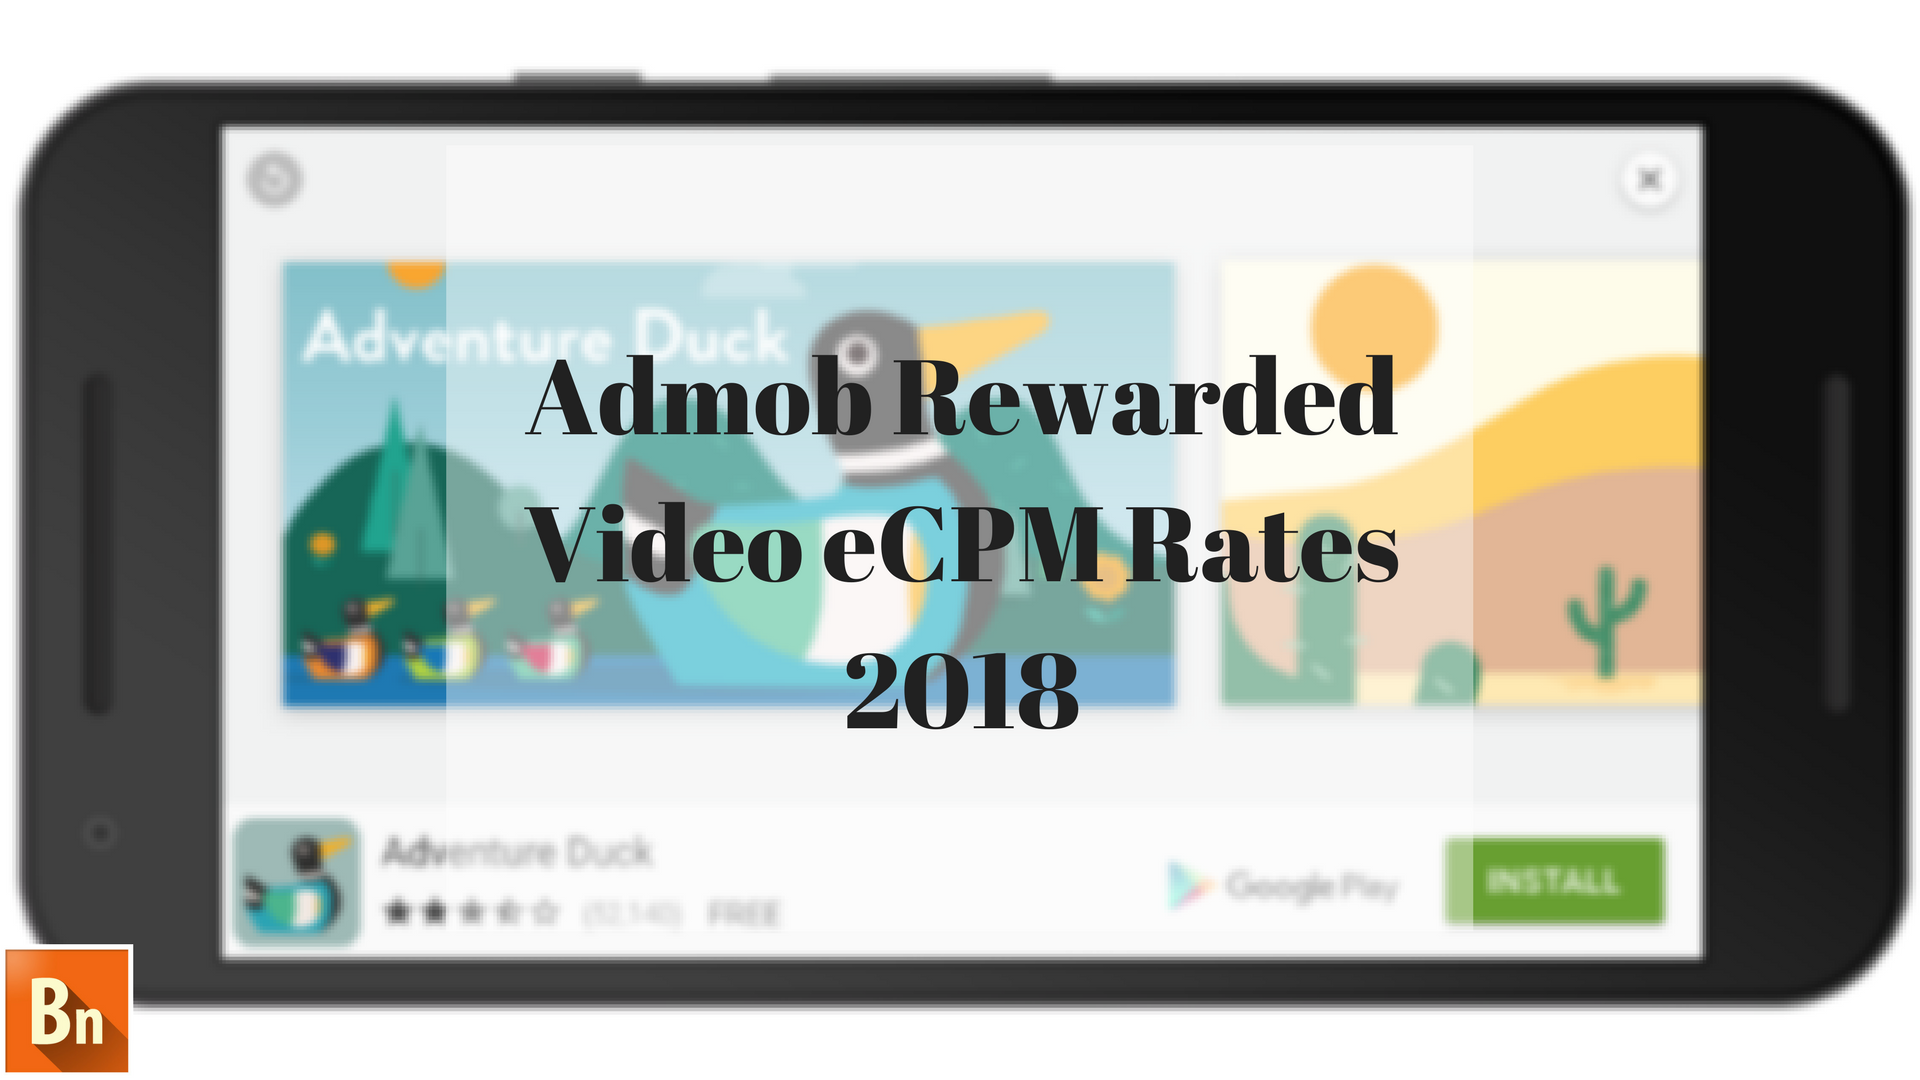 Kongregate Uses AdMob to Boost Revenue with Average $30 CPM - Google AdMob